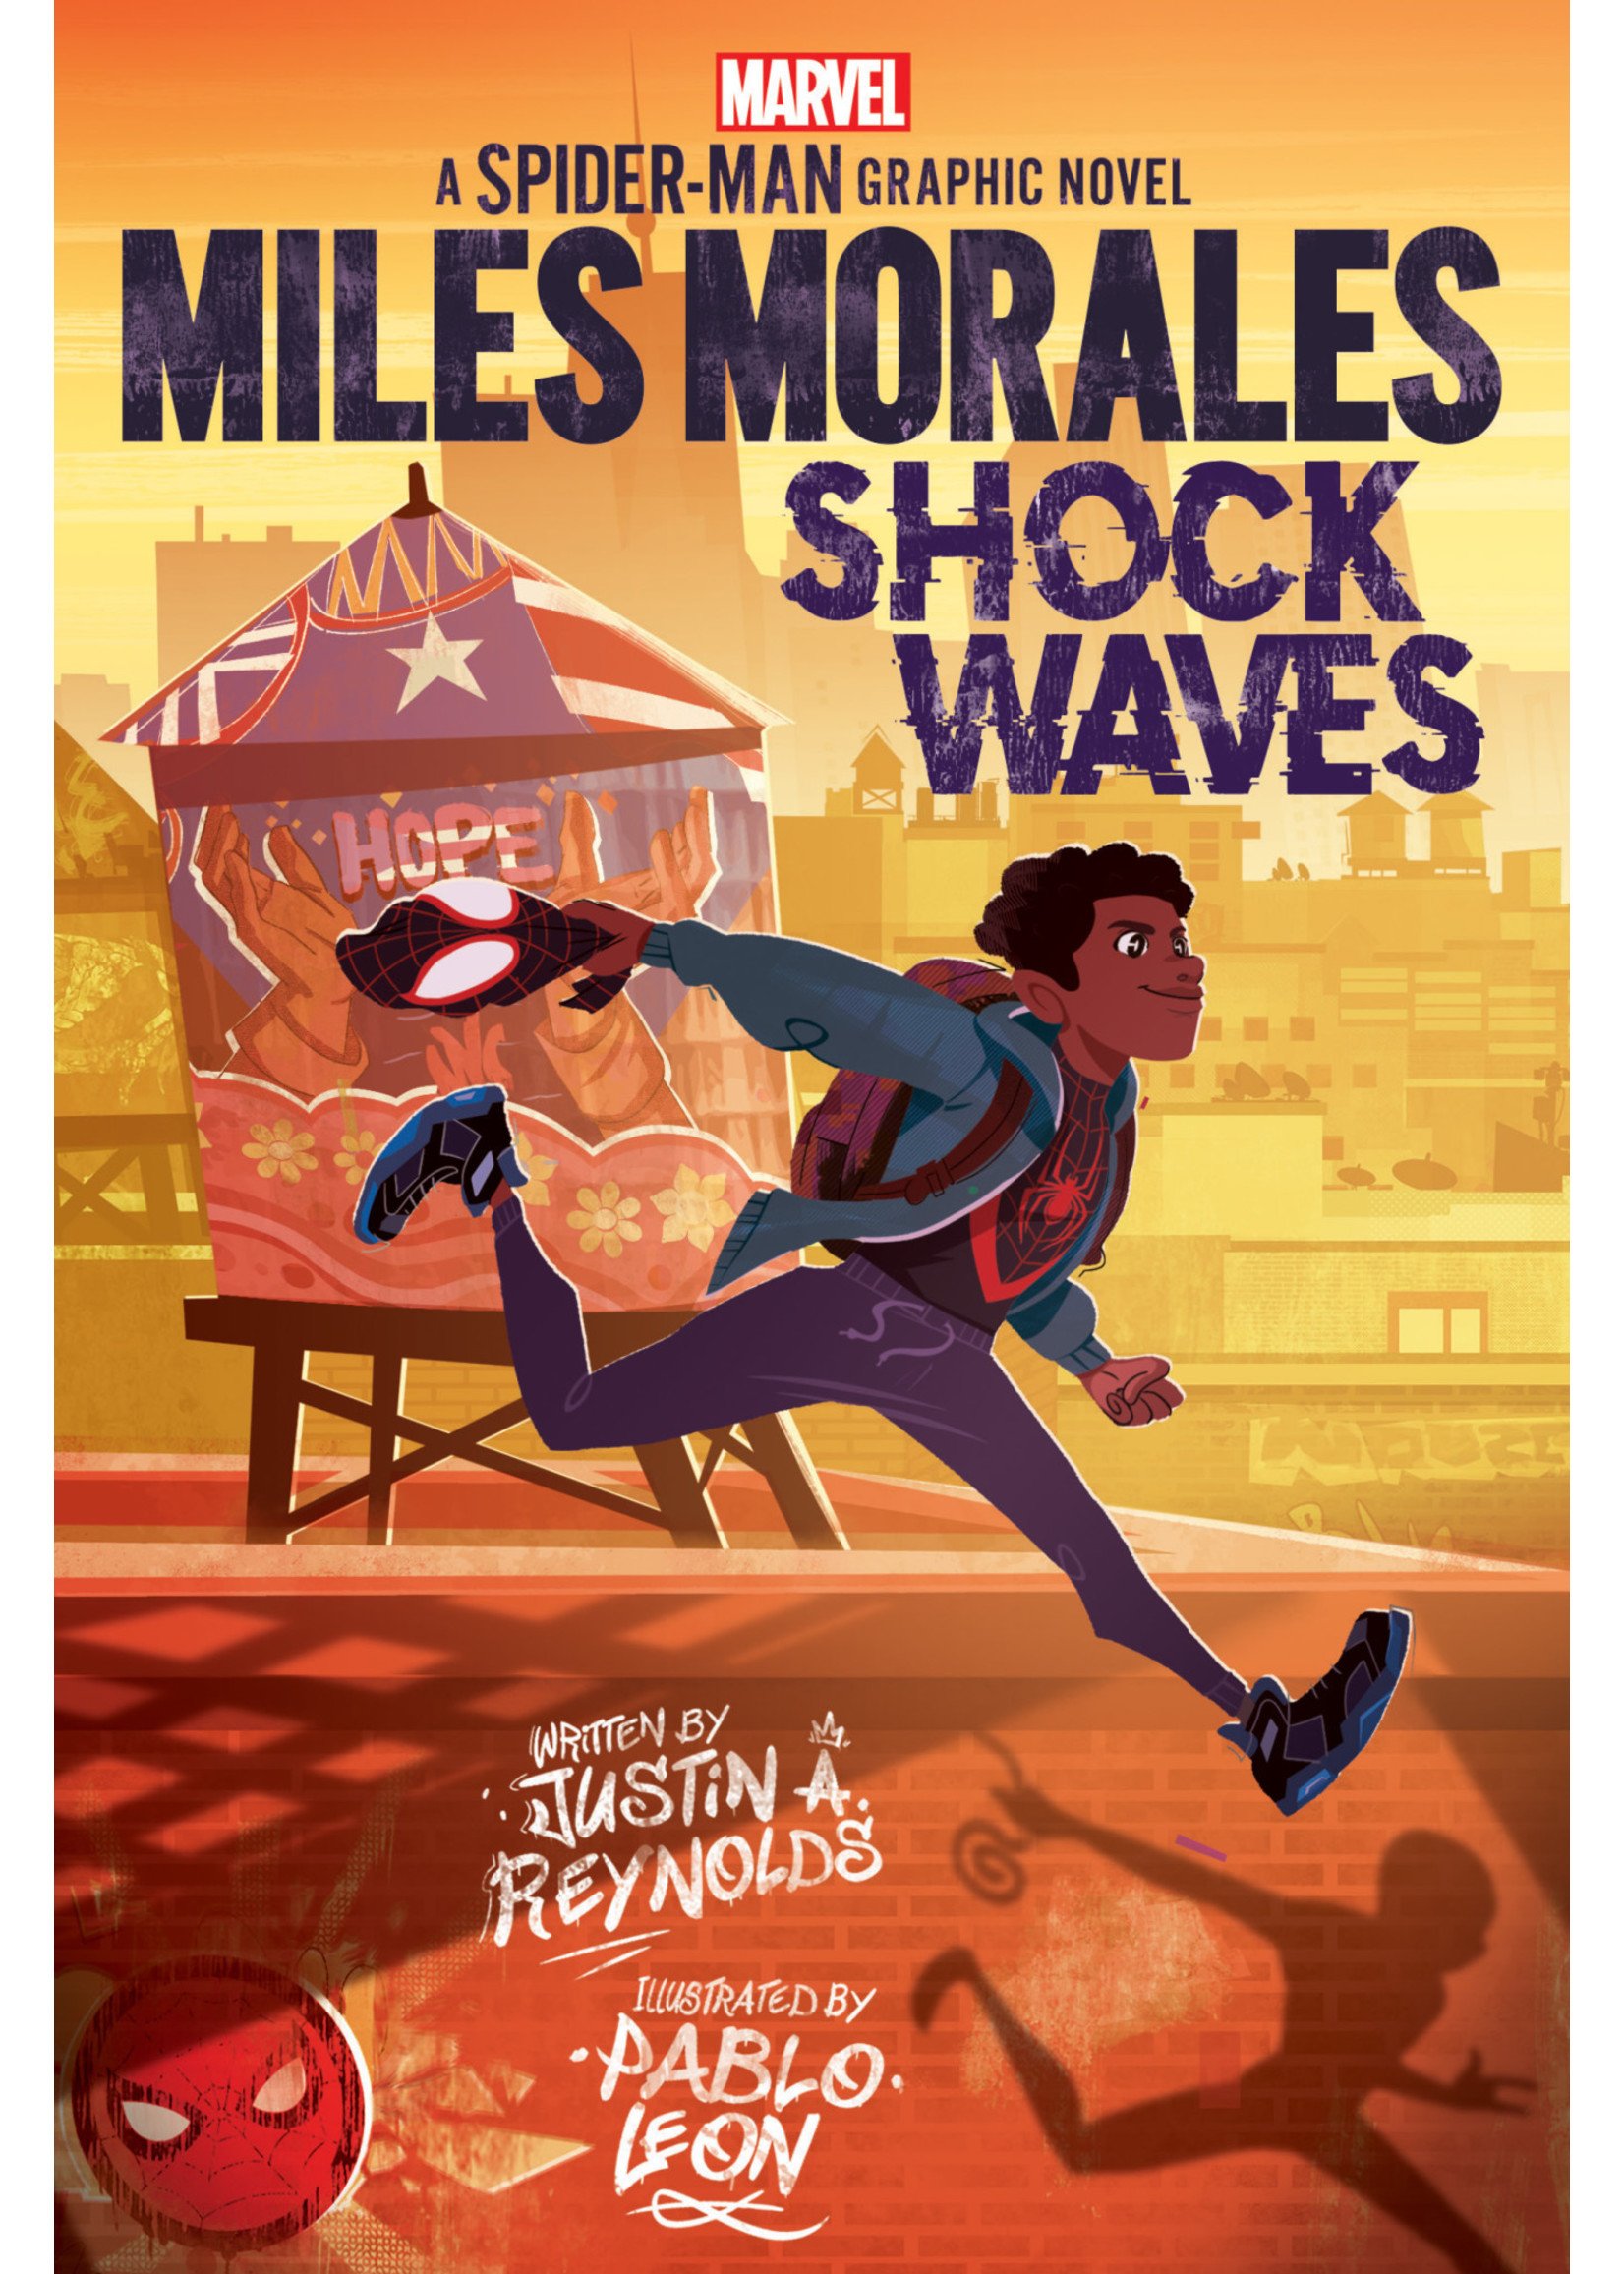 Shock Waves (Miles Morales Graphic Novels #1) by Justin A. Reynolds